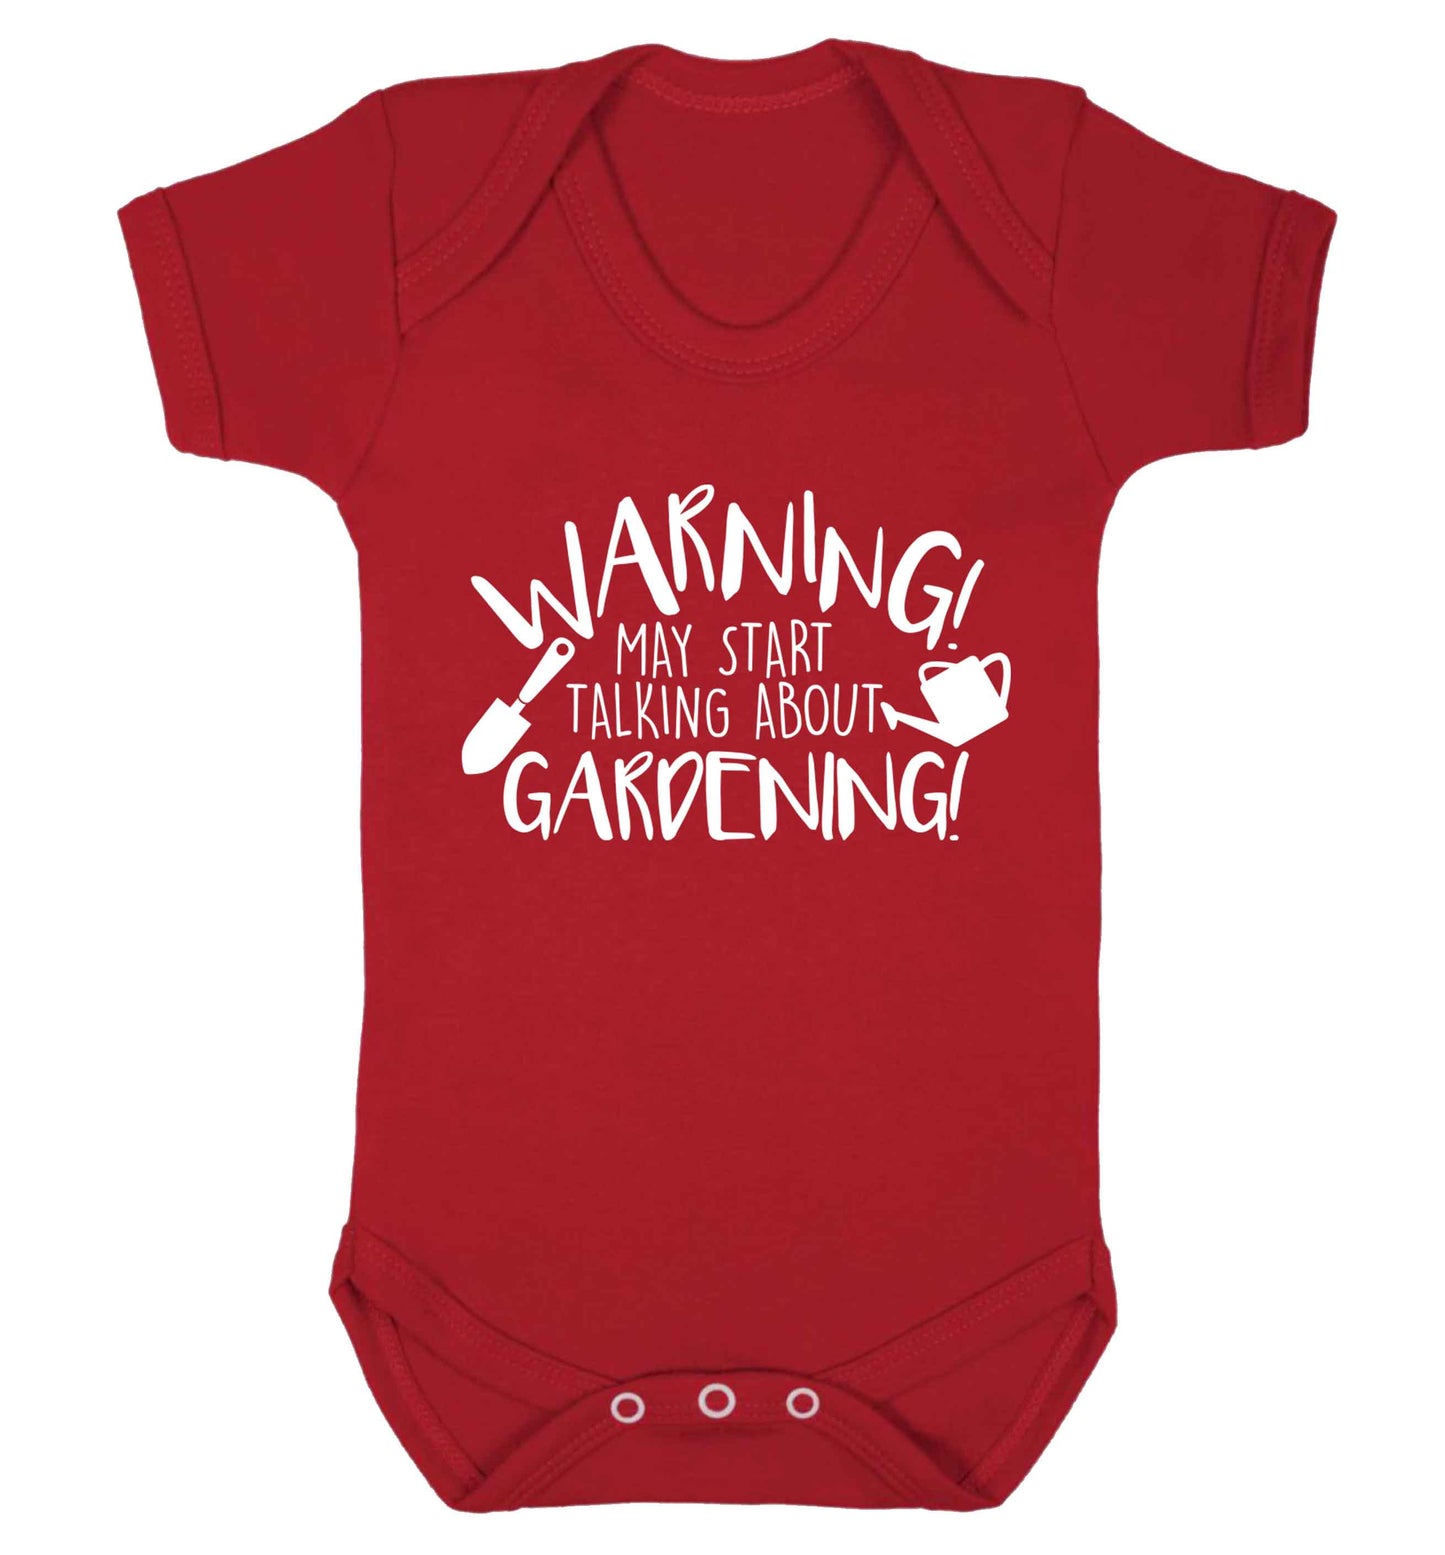 Warning may start talking about gardening Baby Vest red 18-24 months